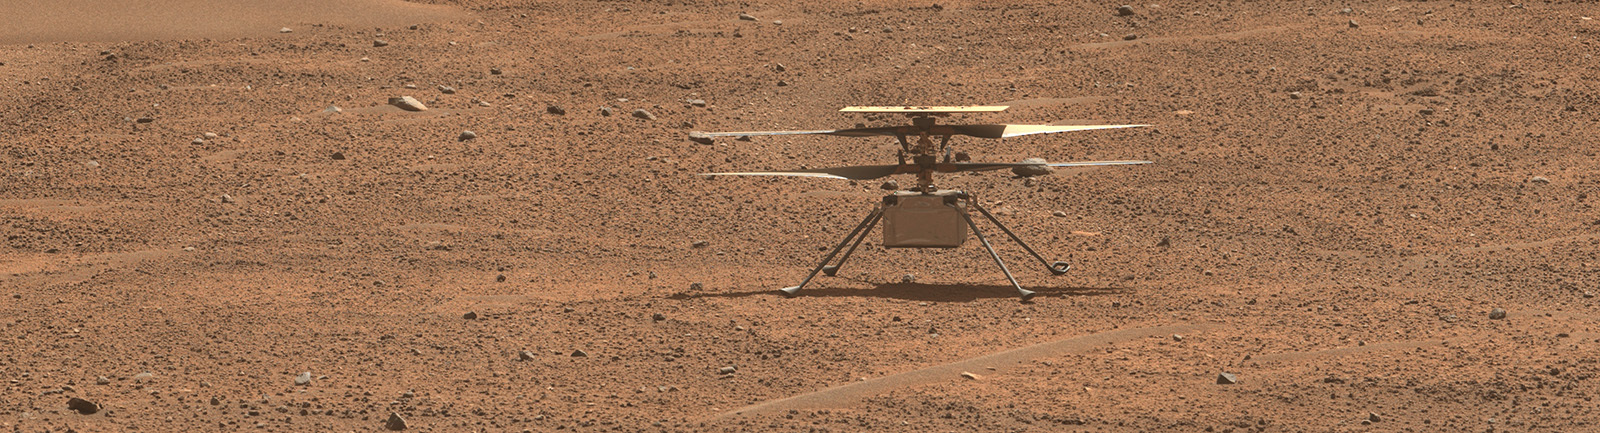 Read article: After Three Years on Mars, NASA's Ingenuity Helicopter Mission Ends